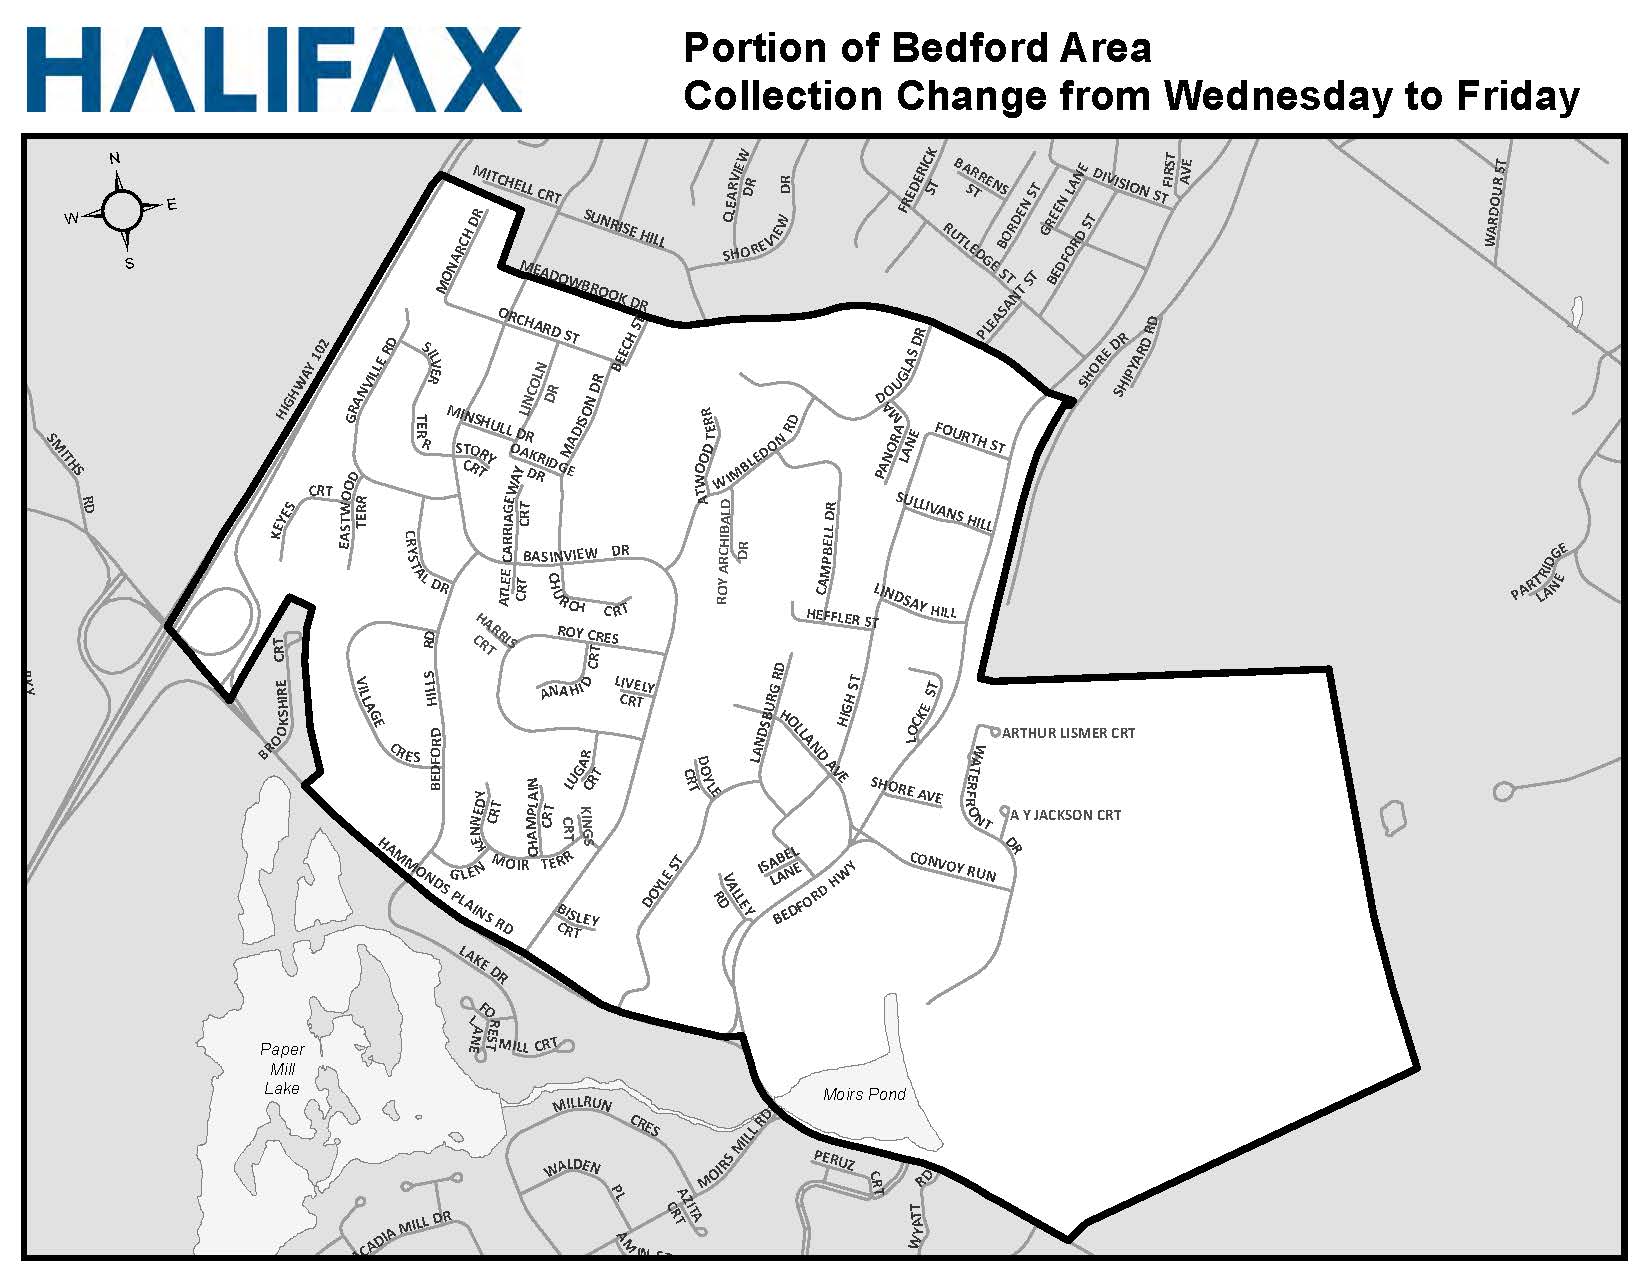 Portion of Bedford area collection change from Wednesday to Friday